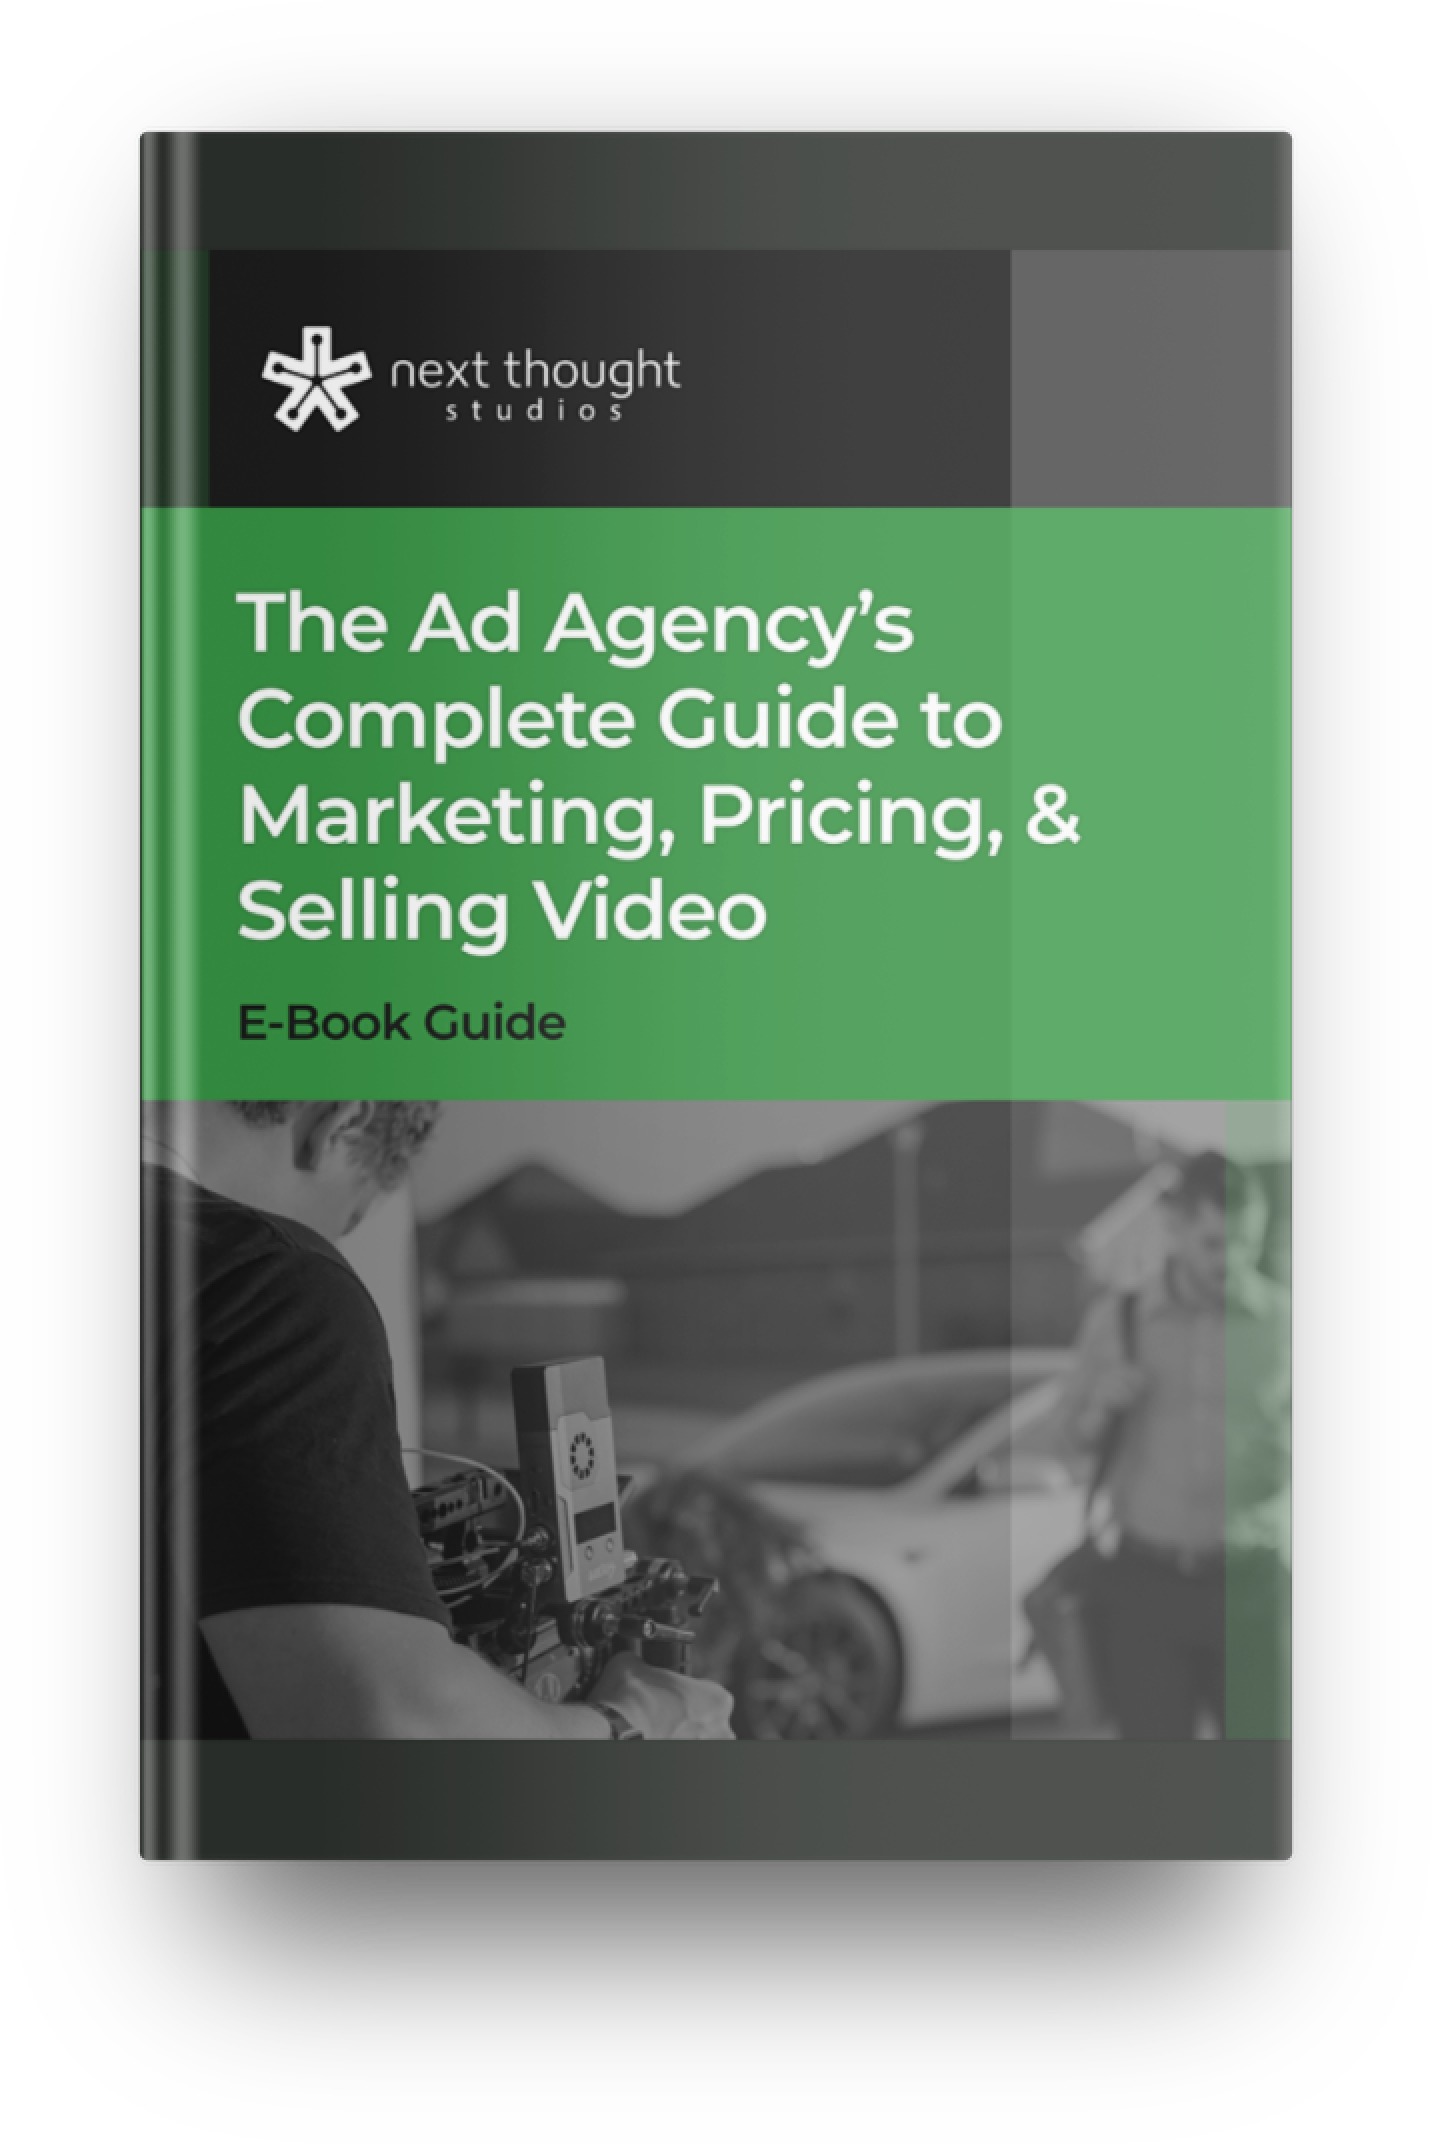 Mockup - The Ad Agency’s Guide to Pricing and Selling Video Marketing